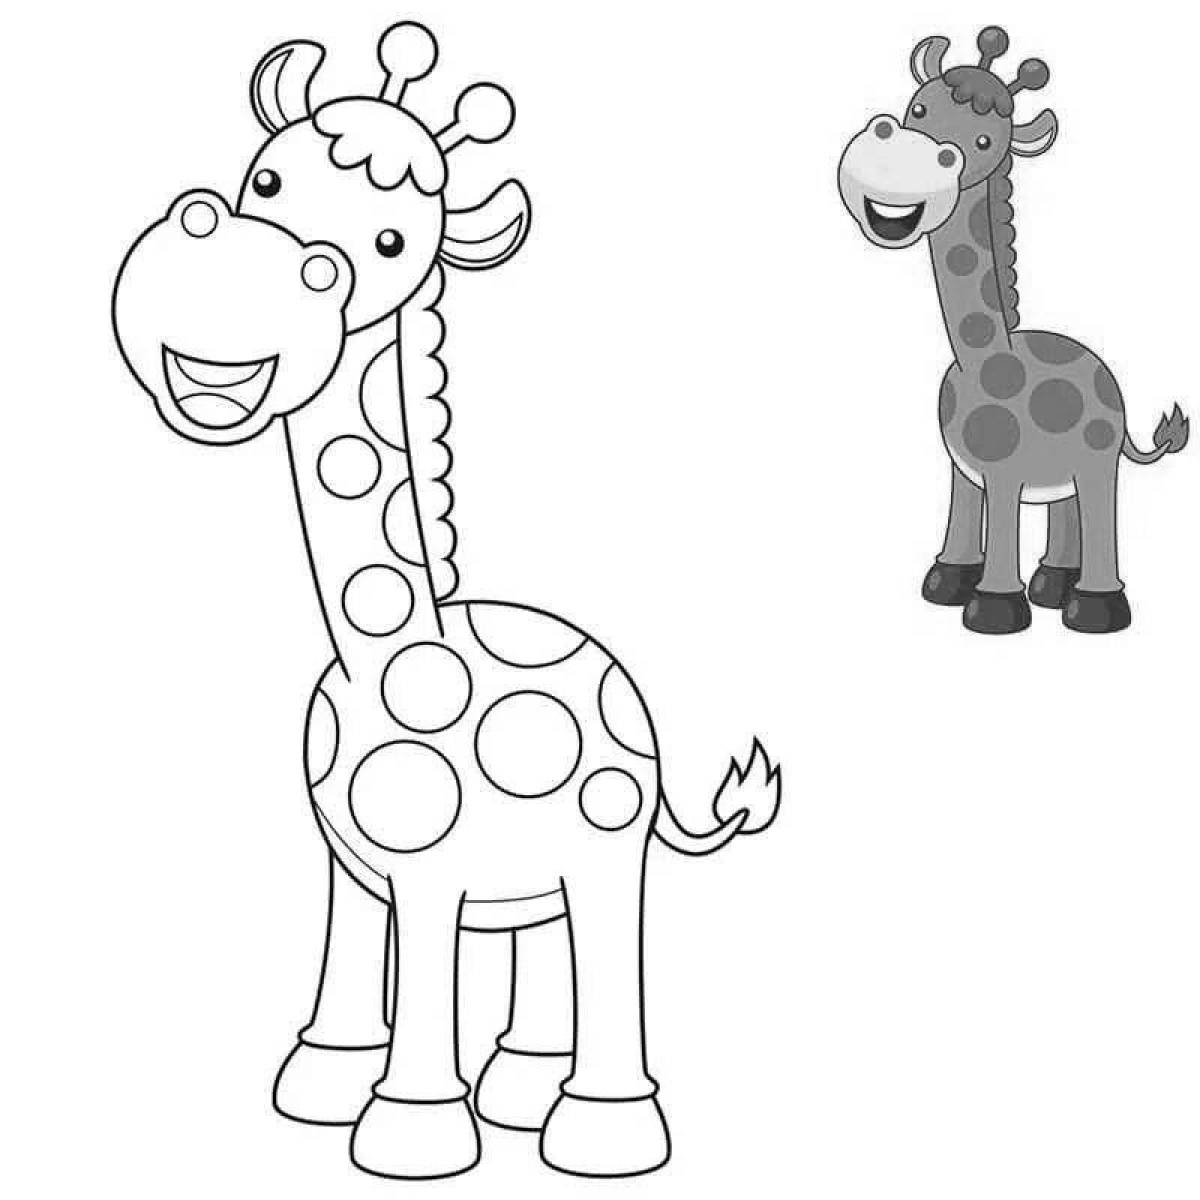 Shiny Giraffe Coloring Page for Babies